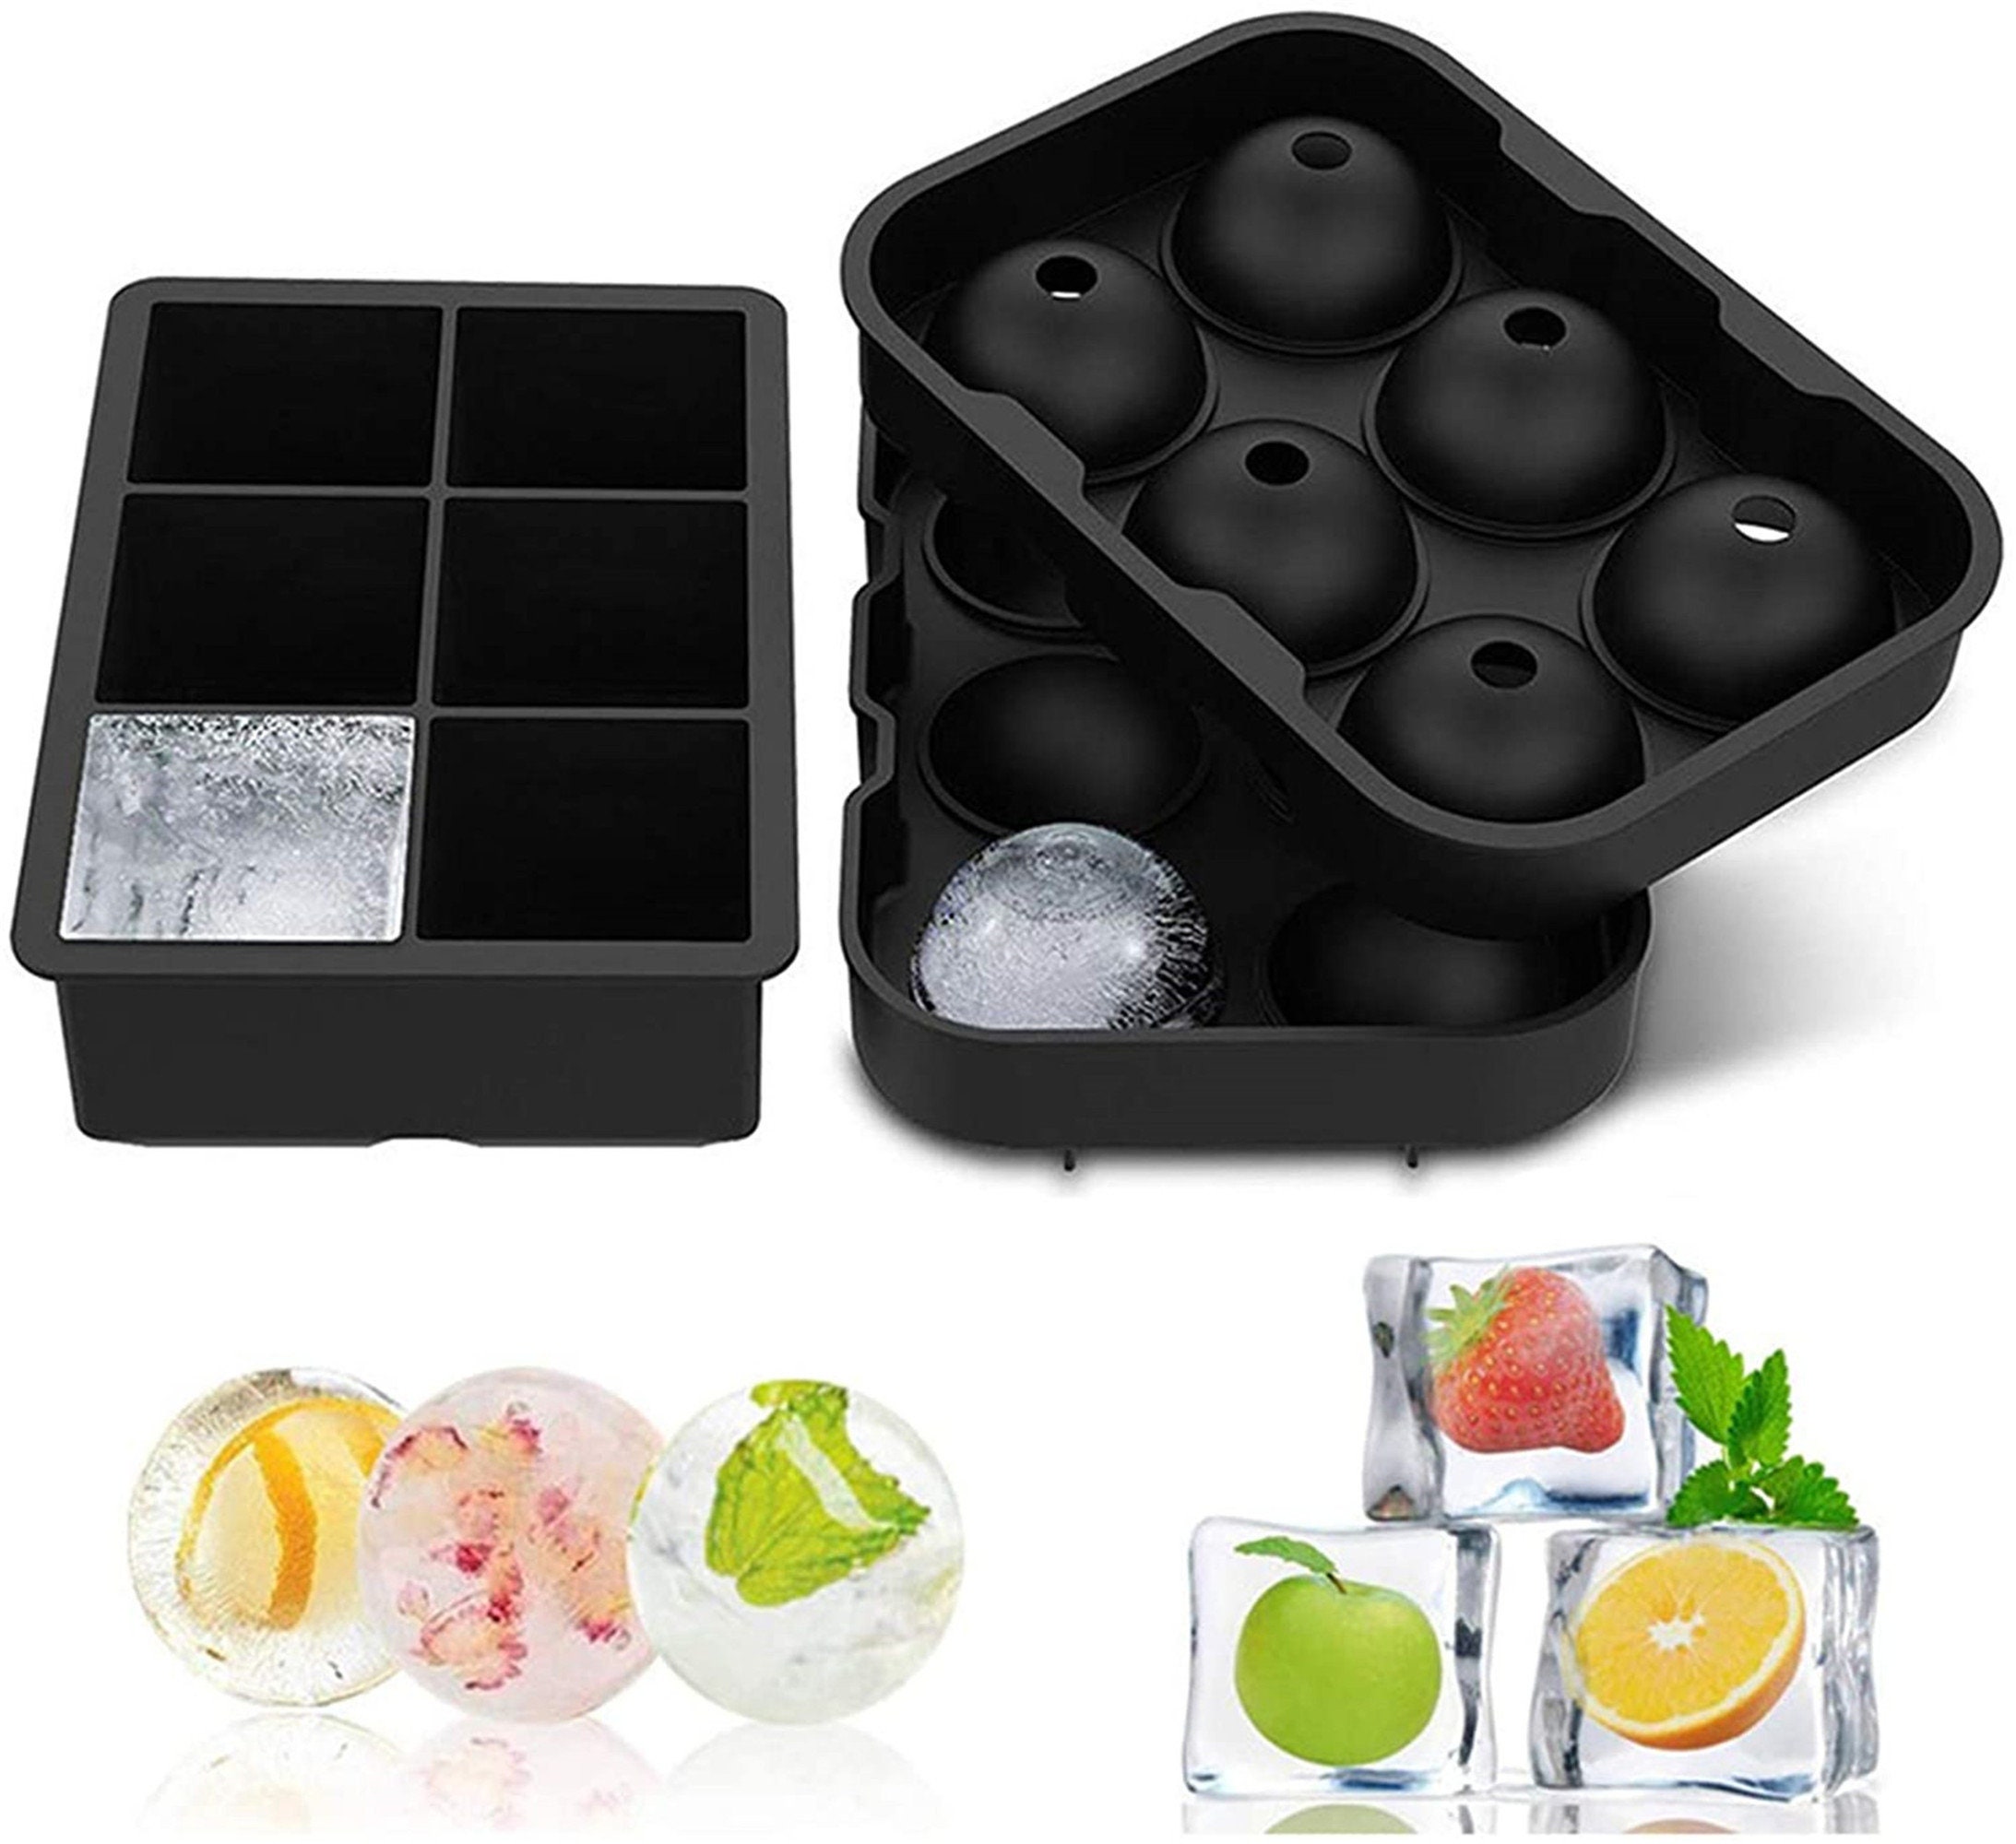 Ice Cube Trays With Lid - Set of 2 Ice Trays By ChefLand | Easy Release,  Stackable, Compact, Odorless, BPA-Free Ice Molding Trays For Whiskey, Cold